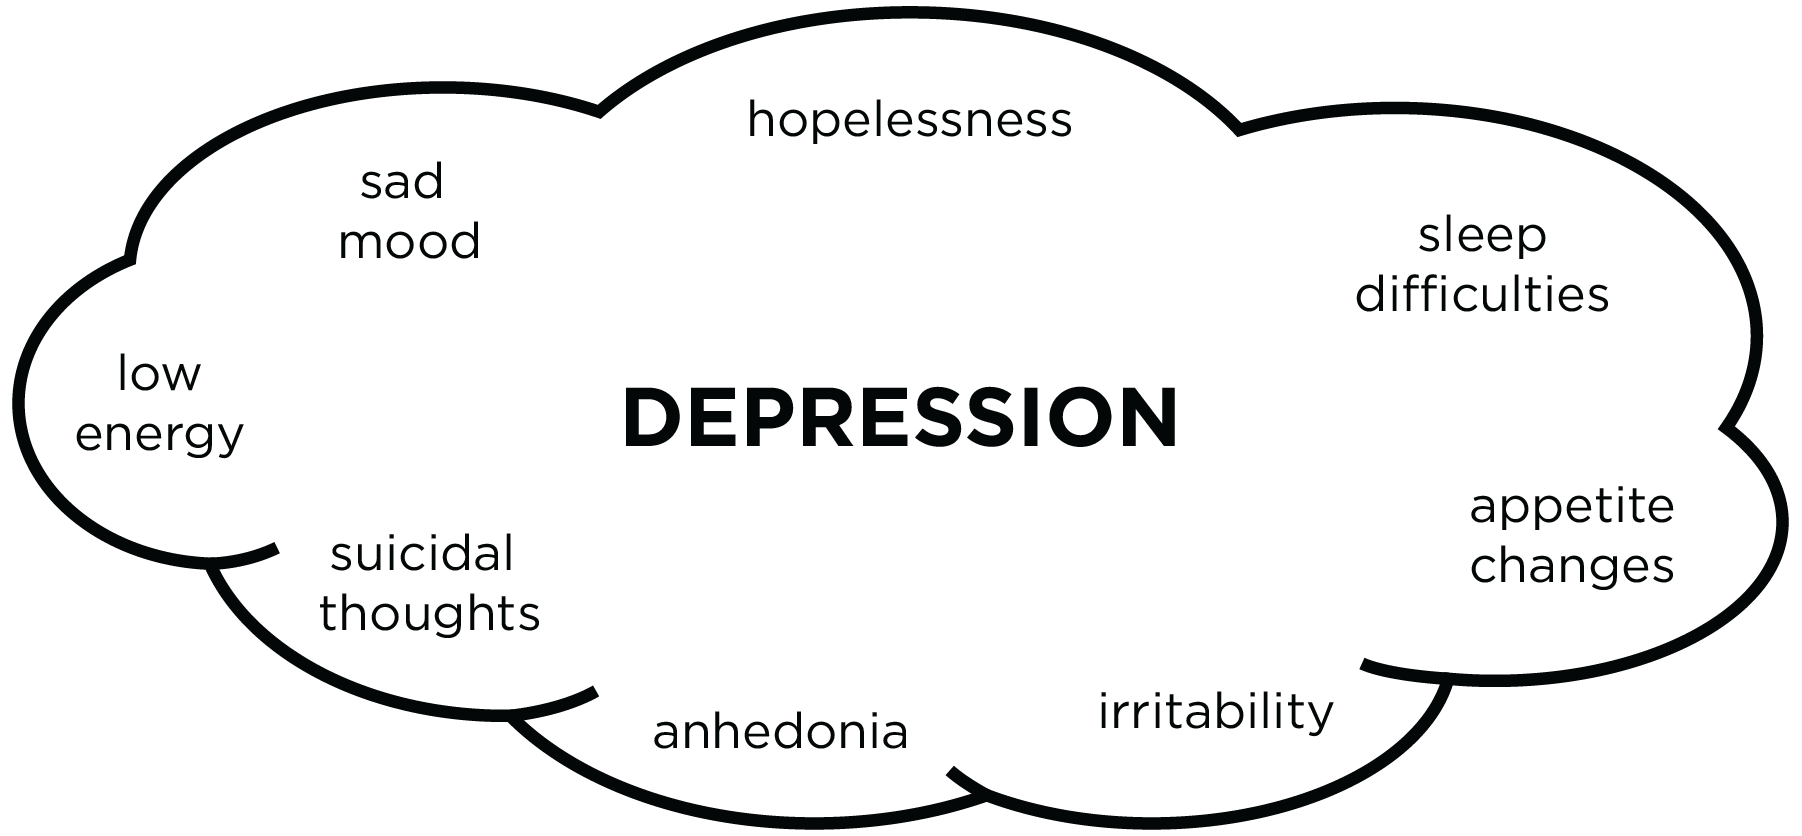 Content Facets of the Construct of Depression.